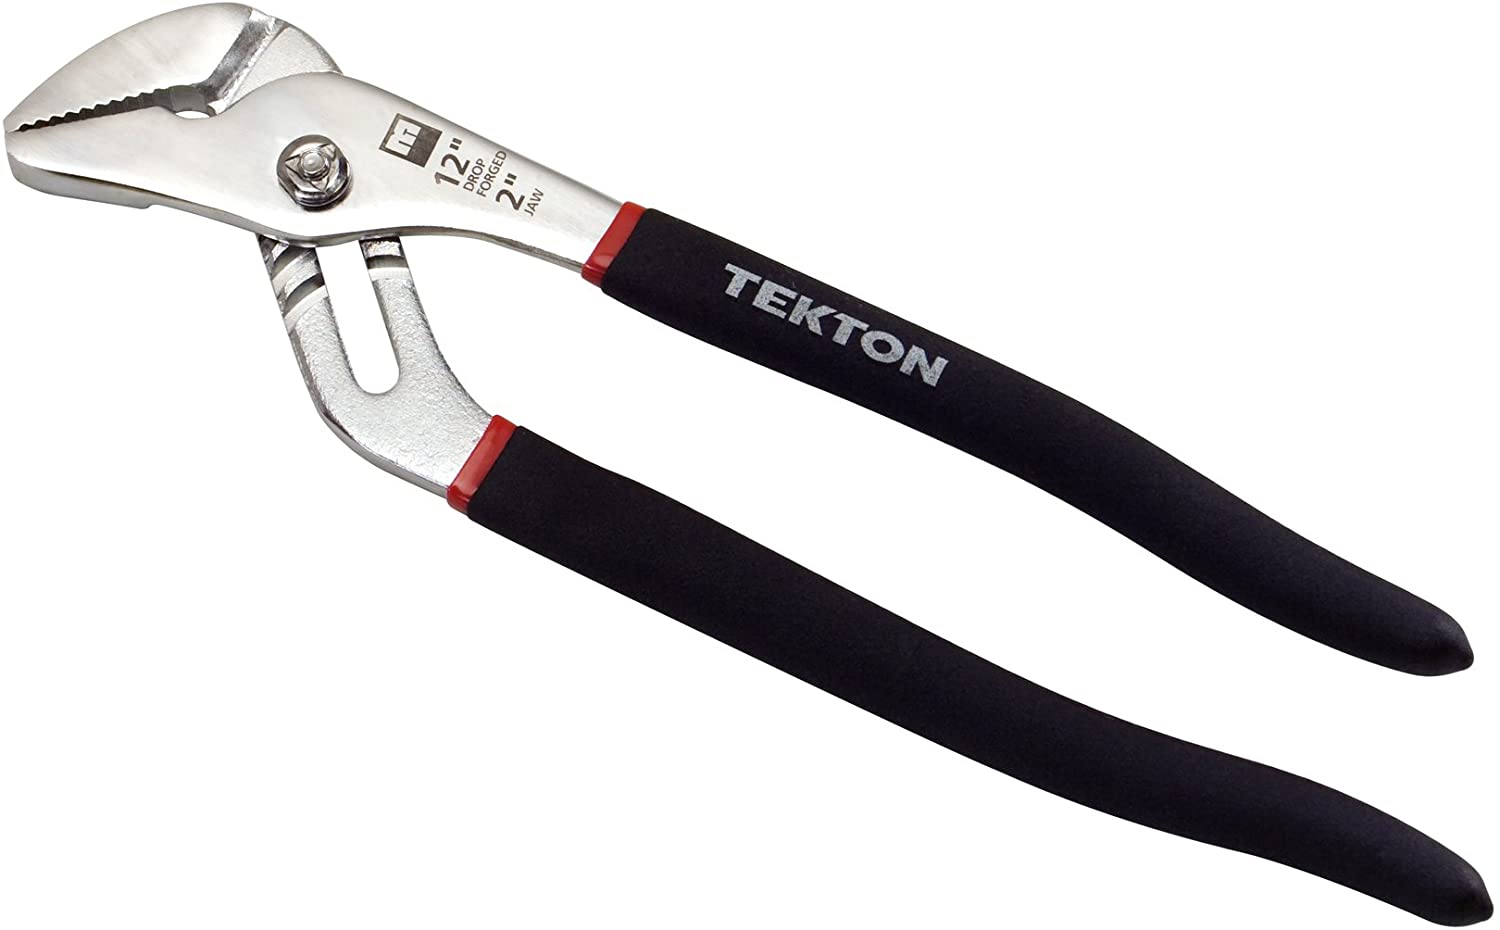 TEKTON Groove joint pliers.